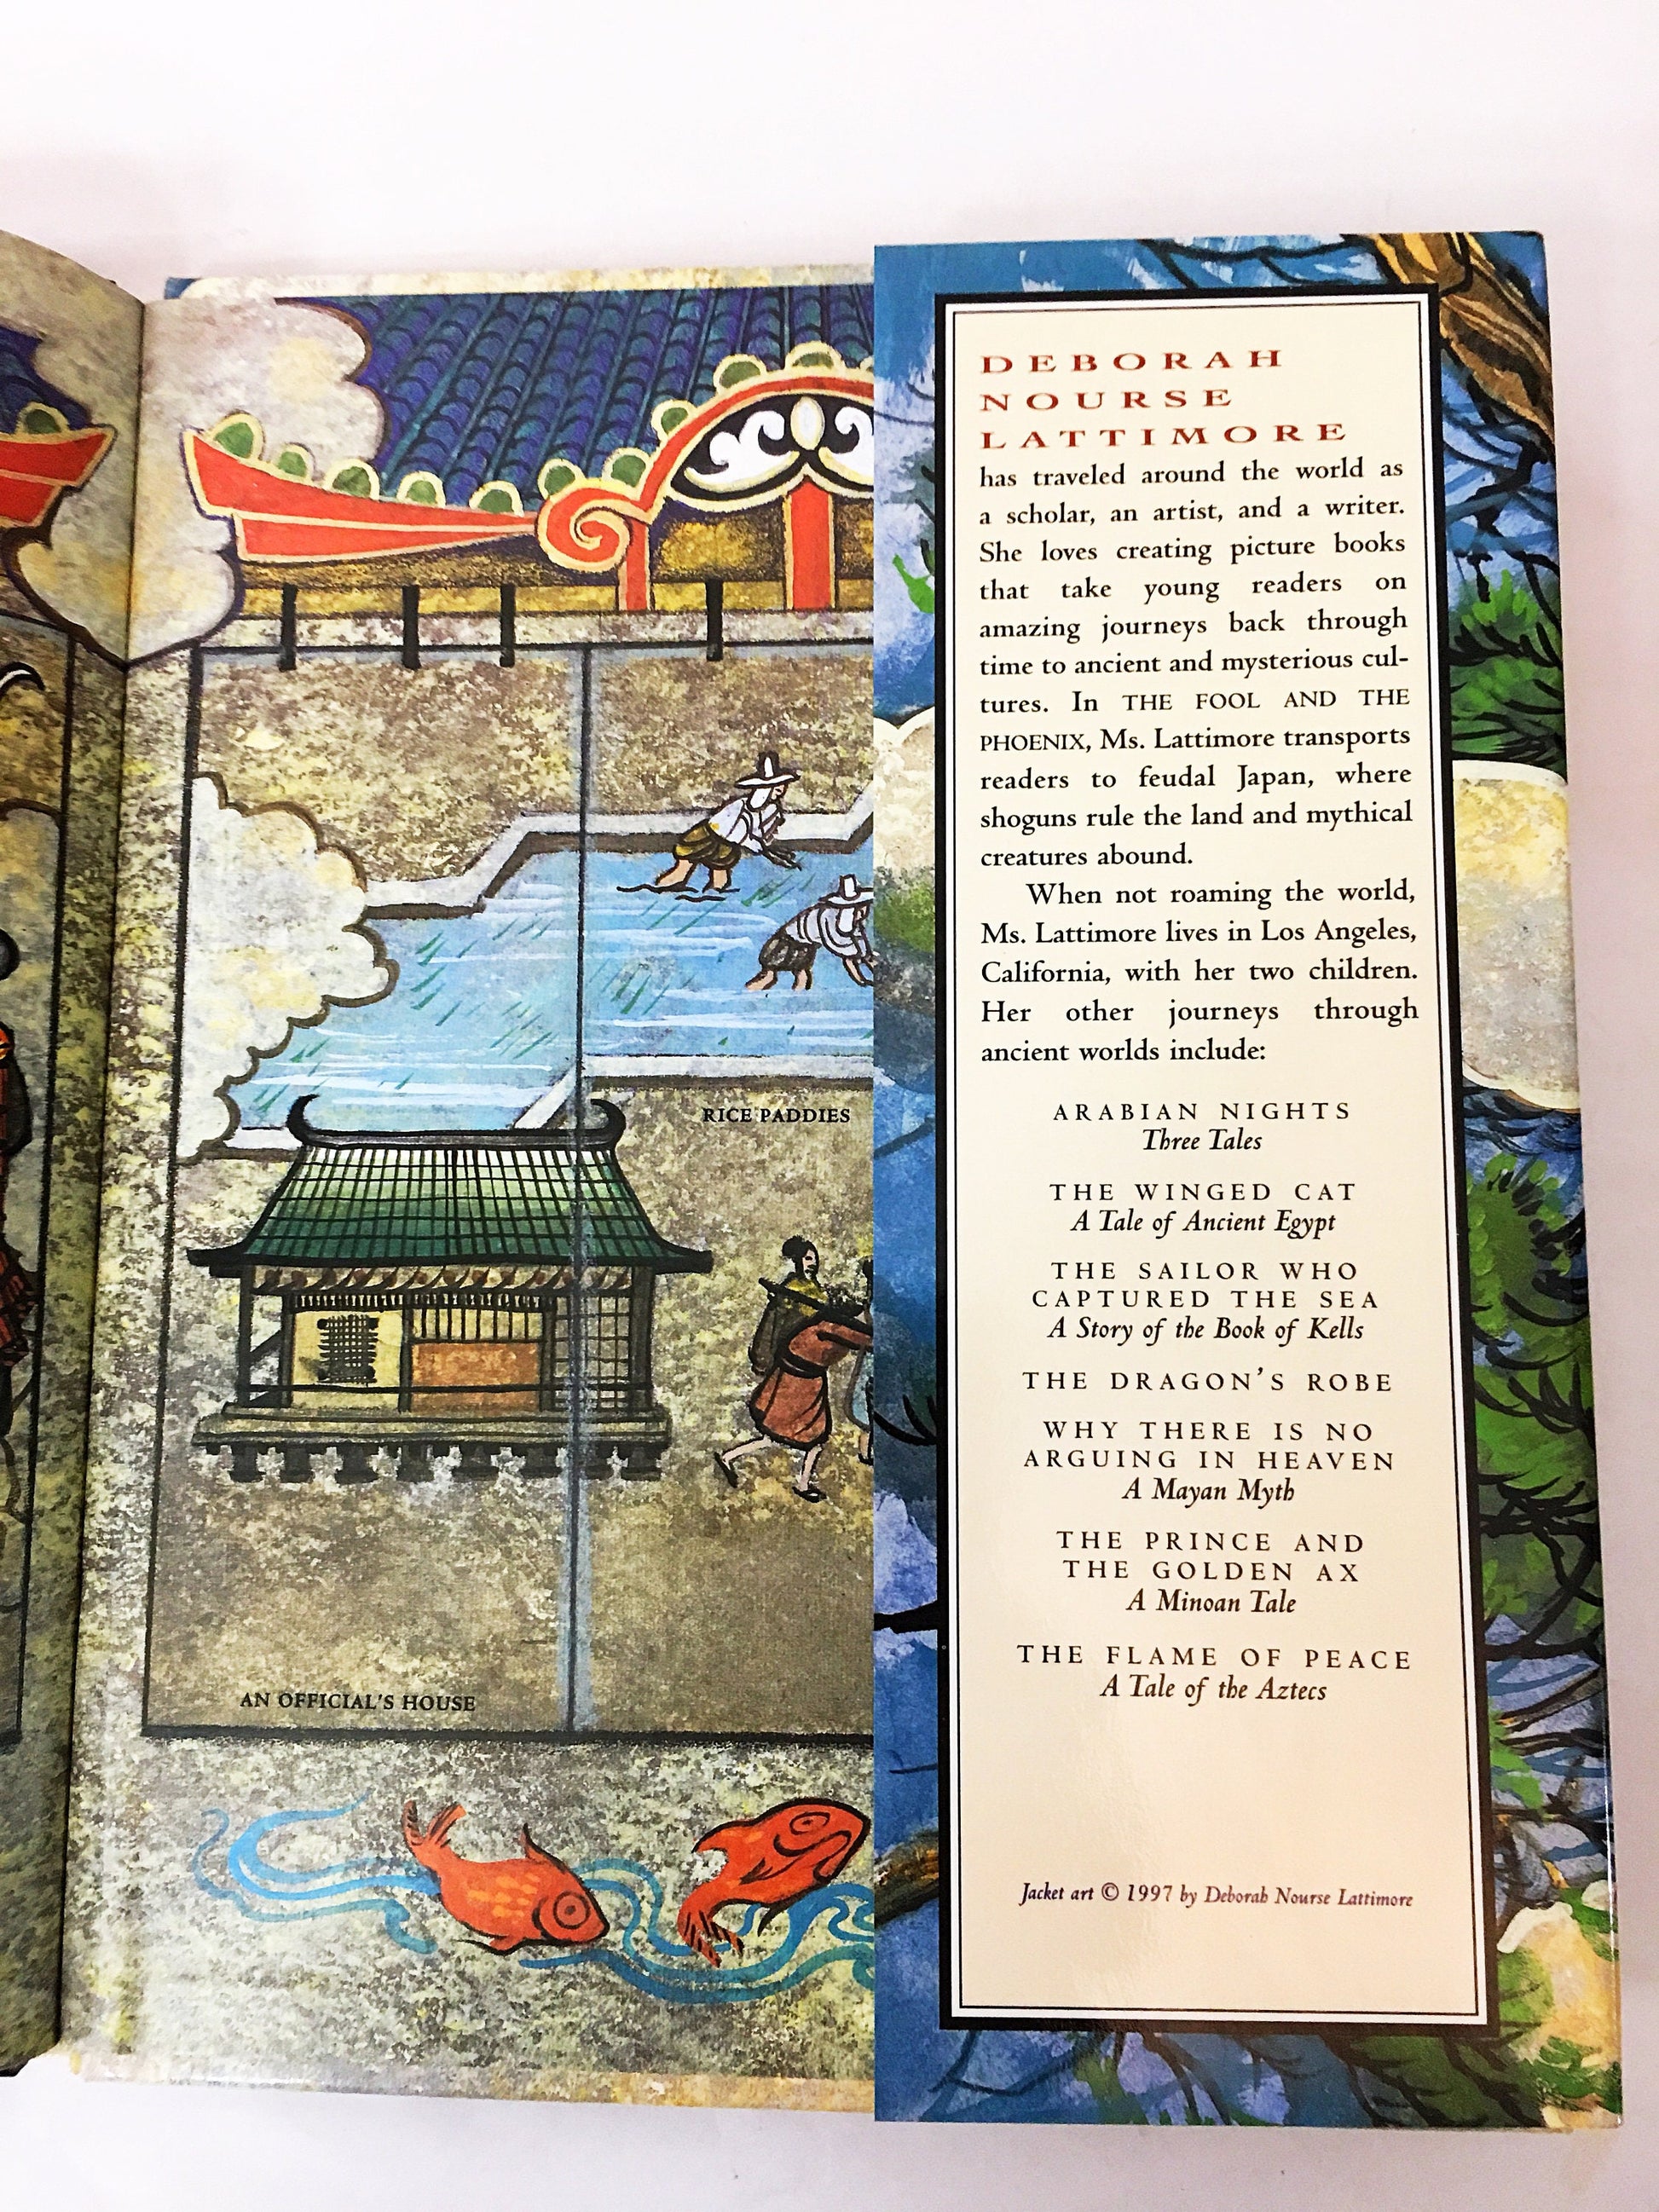 1997 Fool and the Phoenix FIRST EDITION vintage Children's book A Tale of Old Japan Story of courage, honor and love by Deborah Lettimore